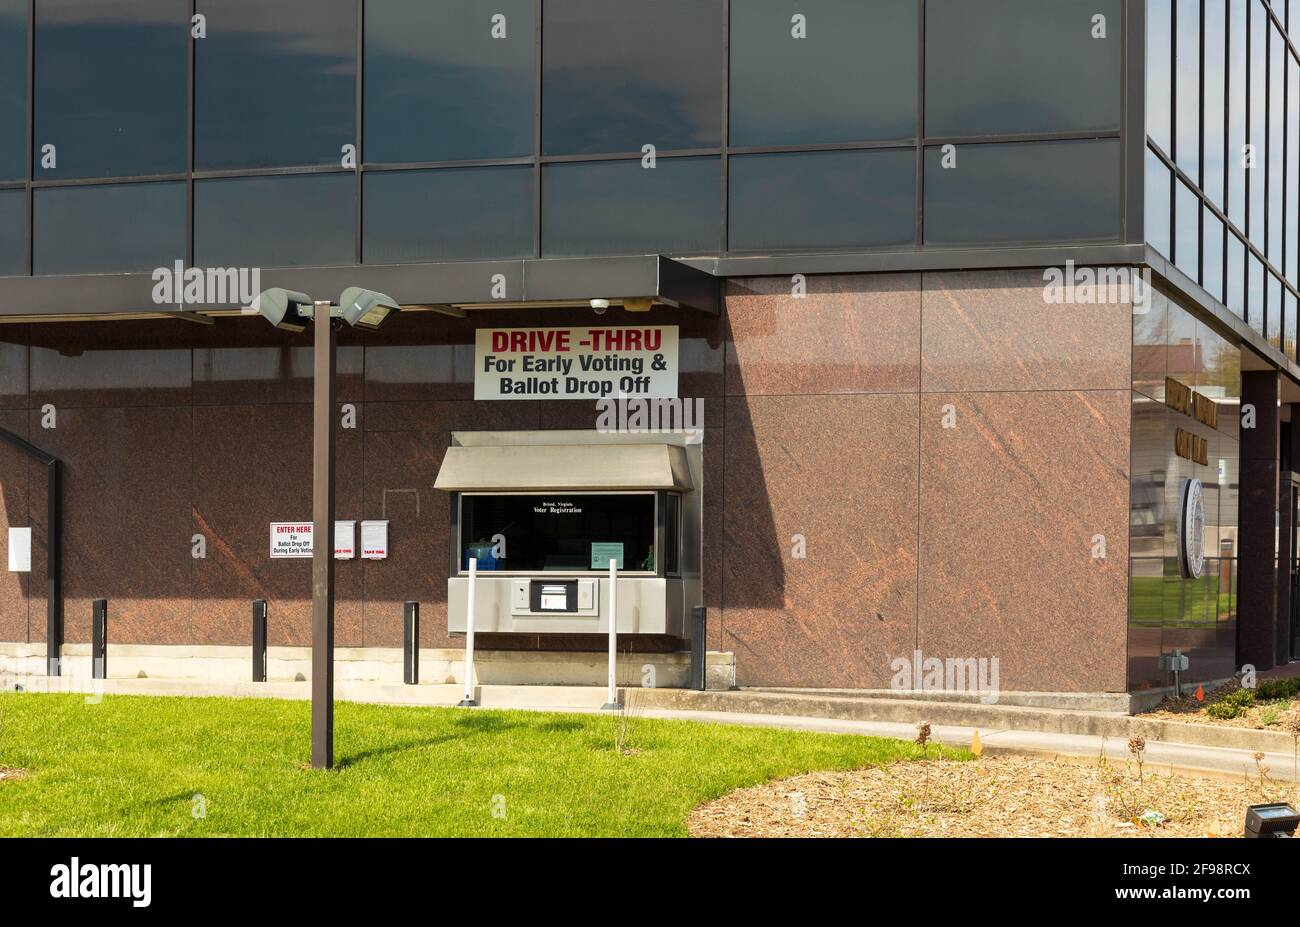 BRISTOL, TN-VA, USA-7 APRIL 2021:  City Hall building, showing sign which reads 'Drive-thru for early voting & ballet drop off'. Stock Photo